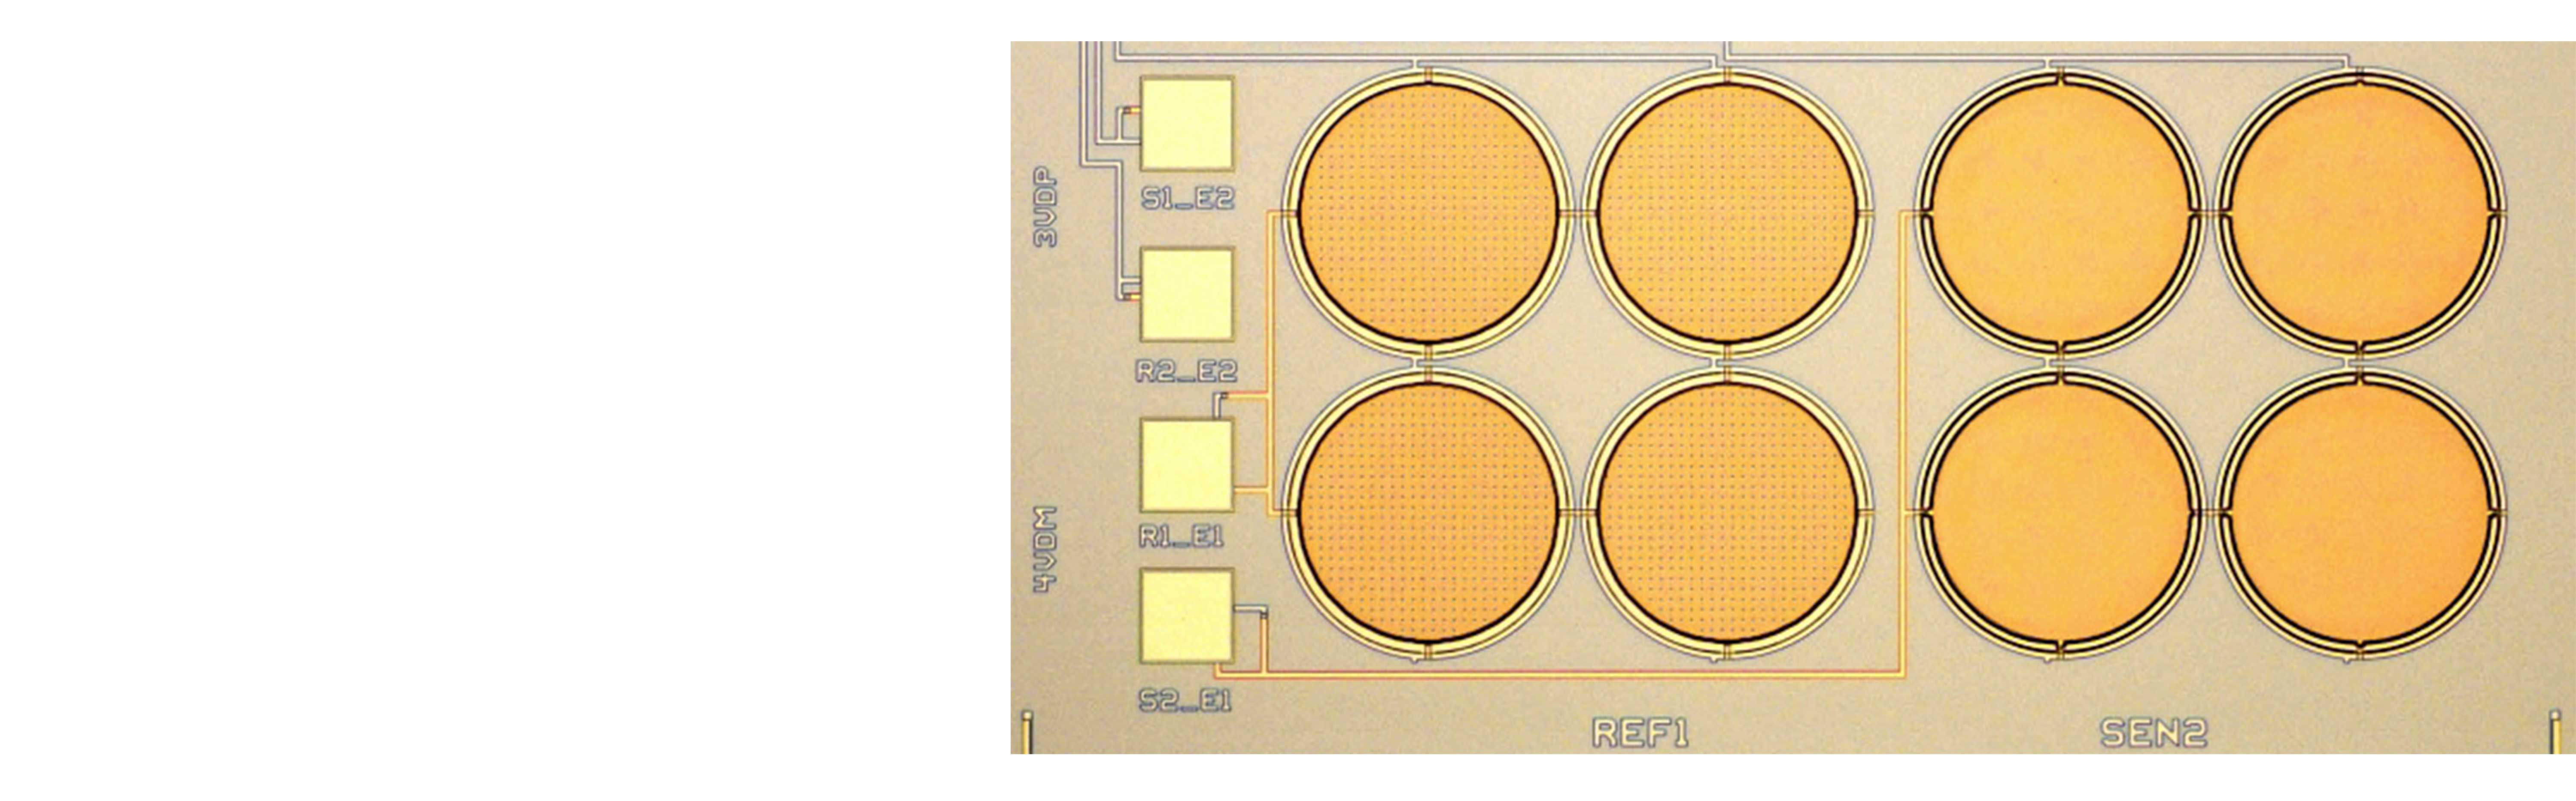 Schematic cross-section of post-CMOS pressure sensor technology with the three levels CMOS, planarization and MEMS sensor level.